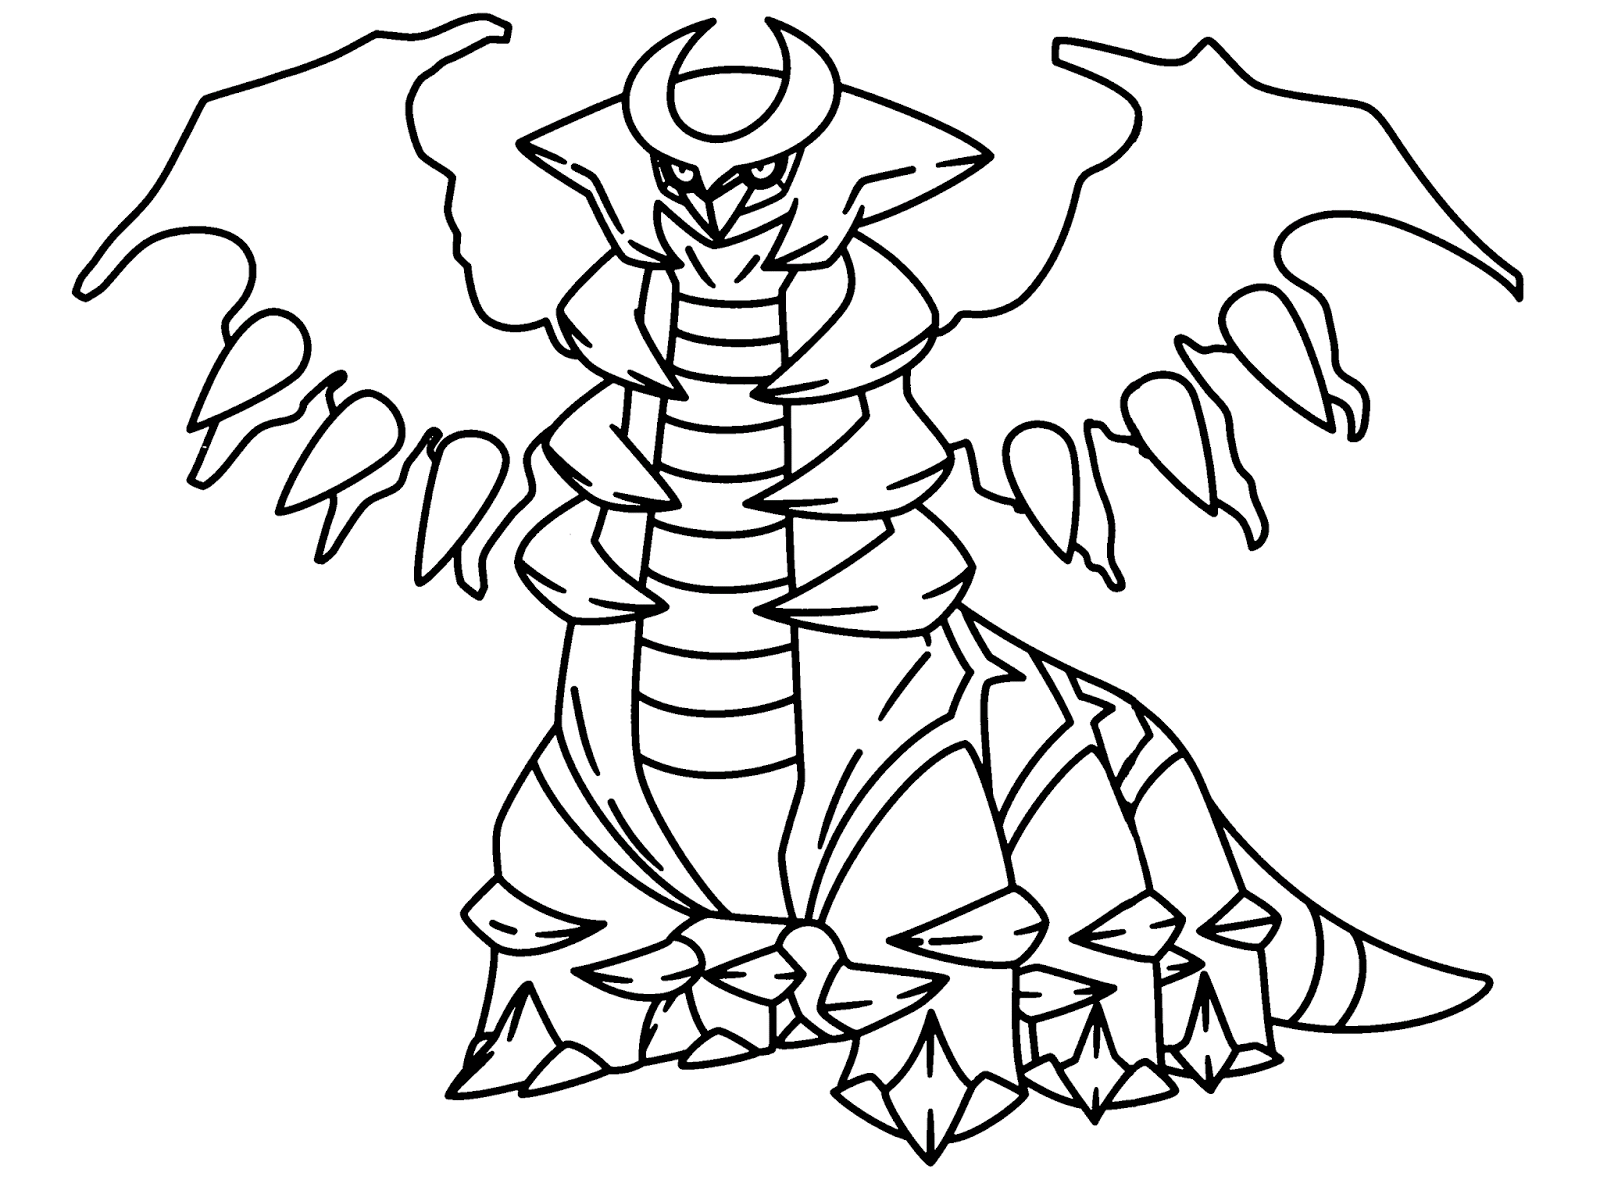 legendary pokemon coloring pages free legendary pokemon coloring pages for kids legendary pages pokemon coloring 